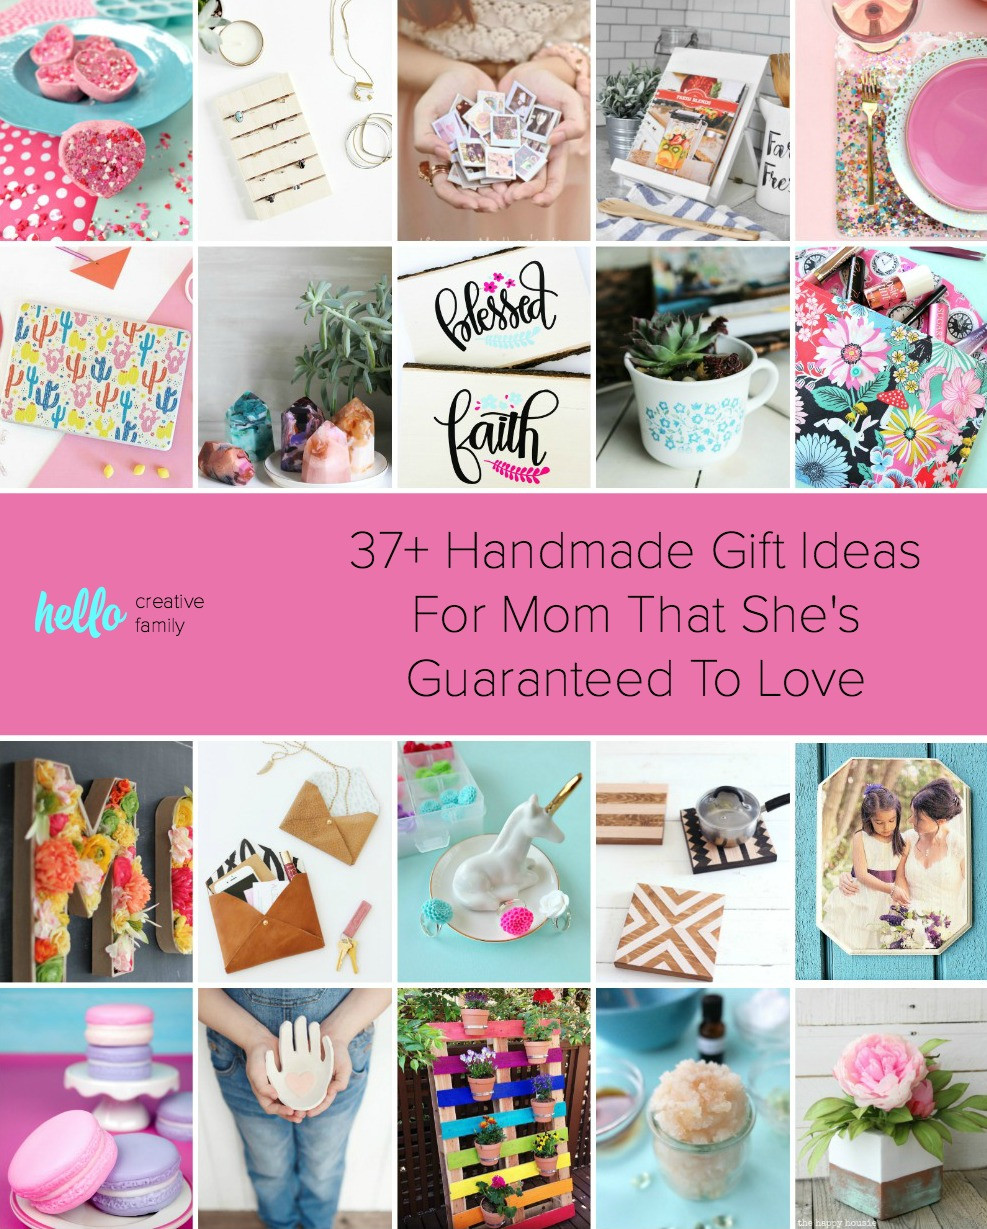 24 Of The Best Ideas For Diy Christmas Gifts For Mom From Daughter 